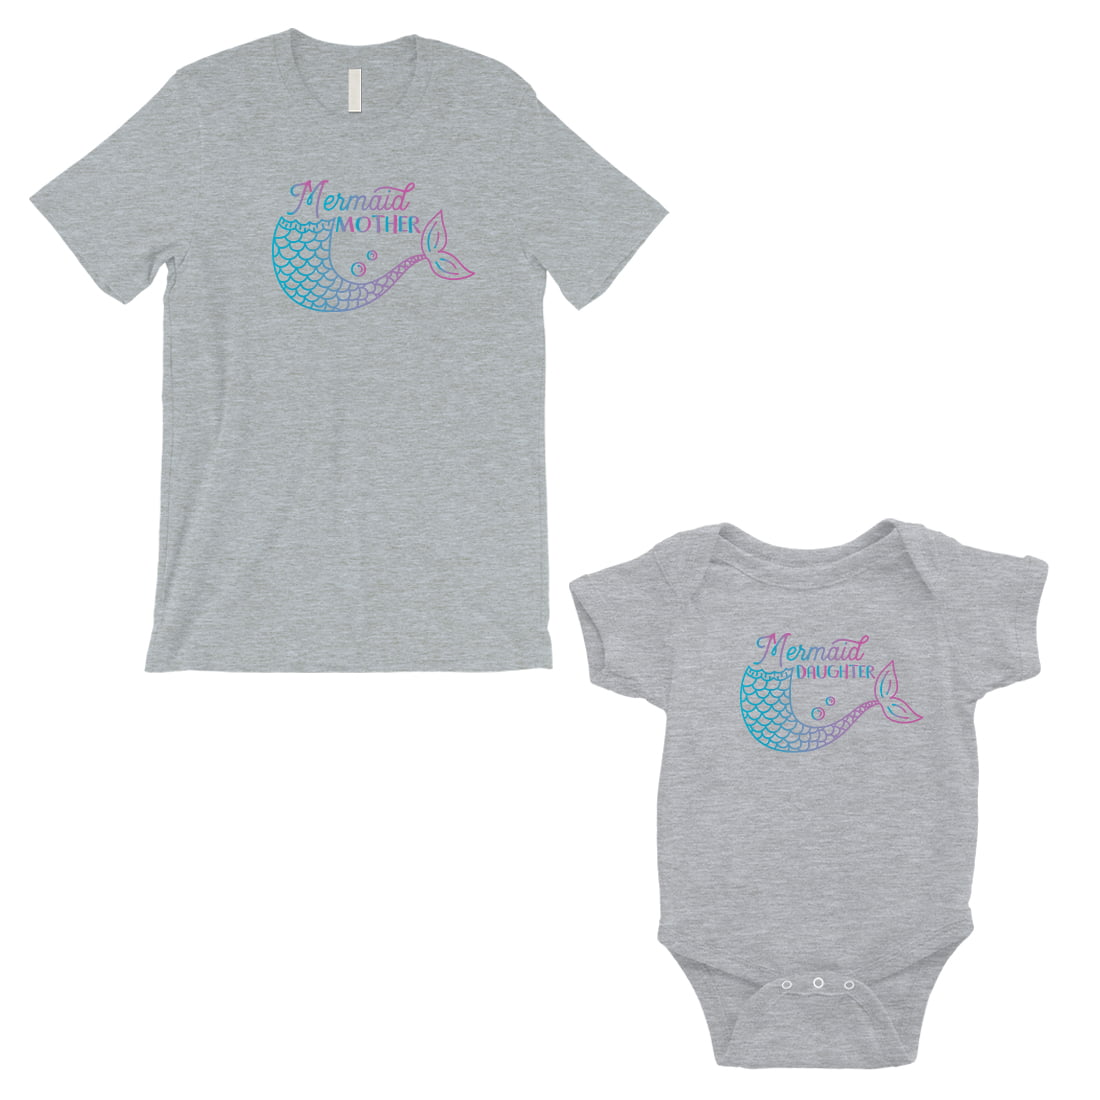 Mother\u2019s Day Gift Mermaid MAMA & Mermaid MINI Matching Mother and Daughter Shirts Mom and Daughter Shirts